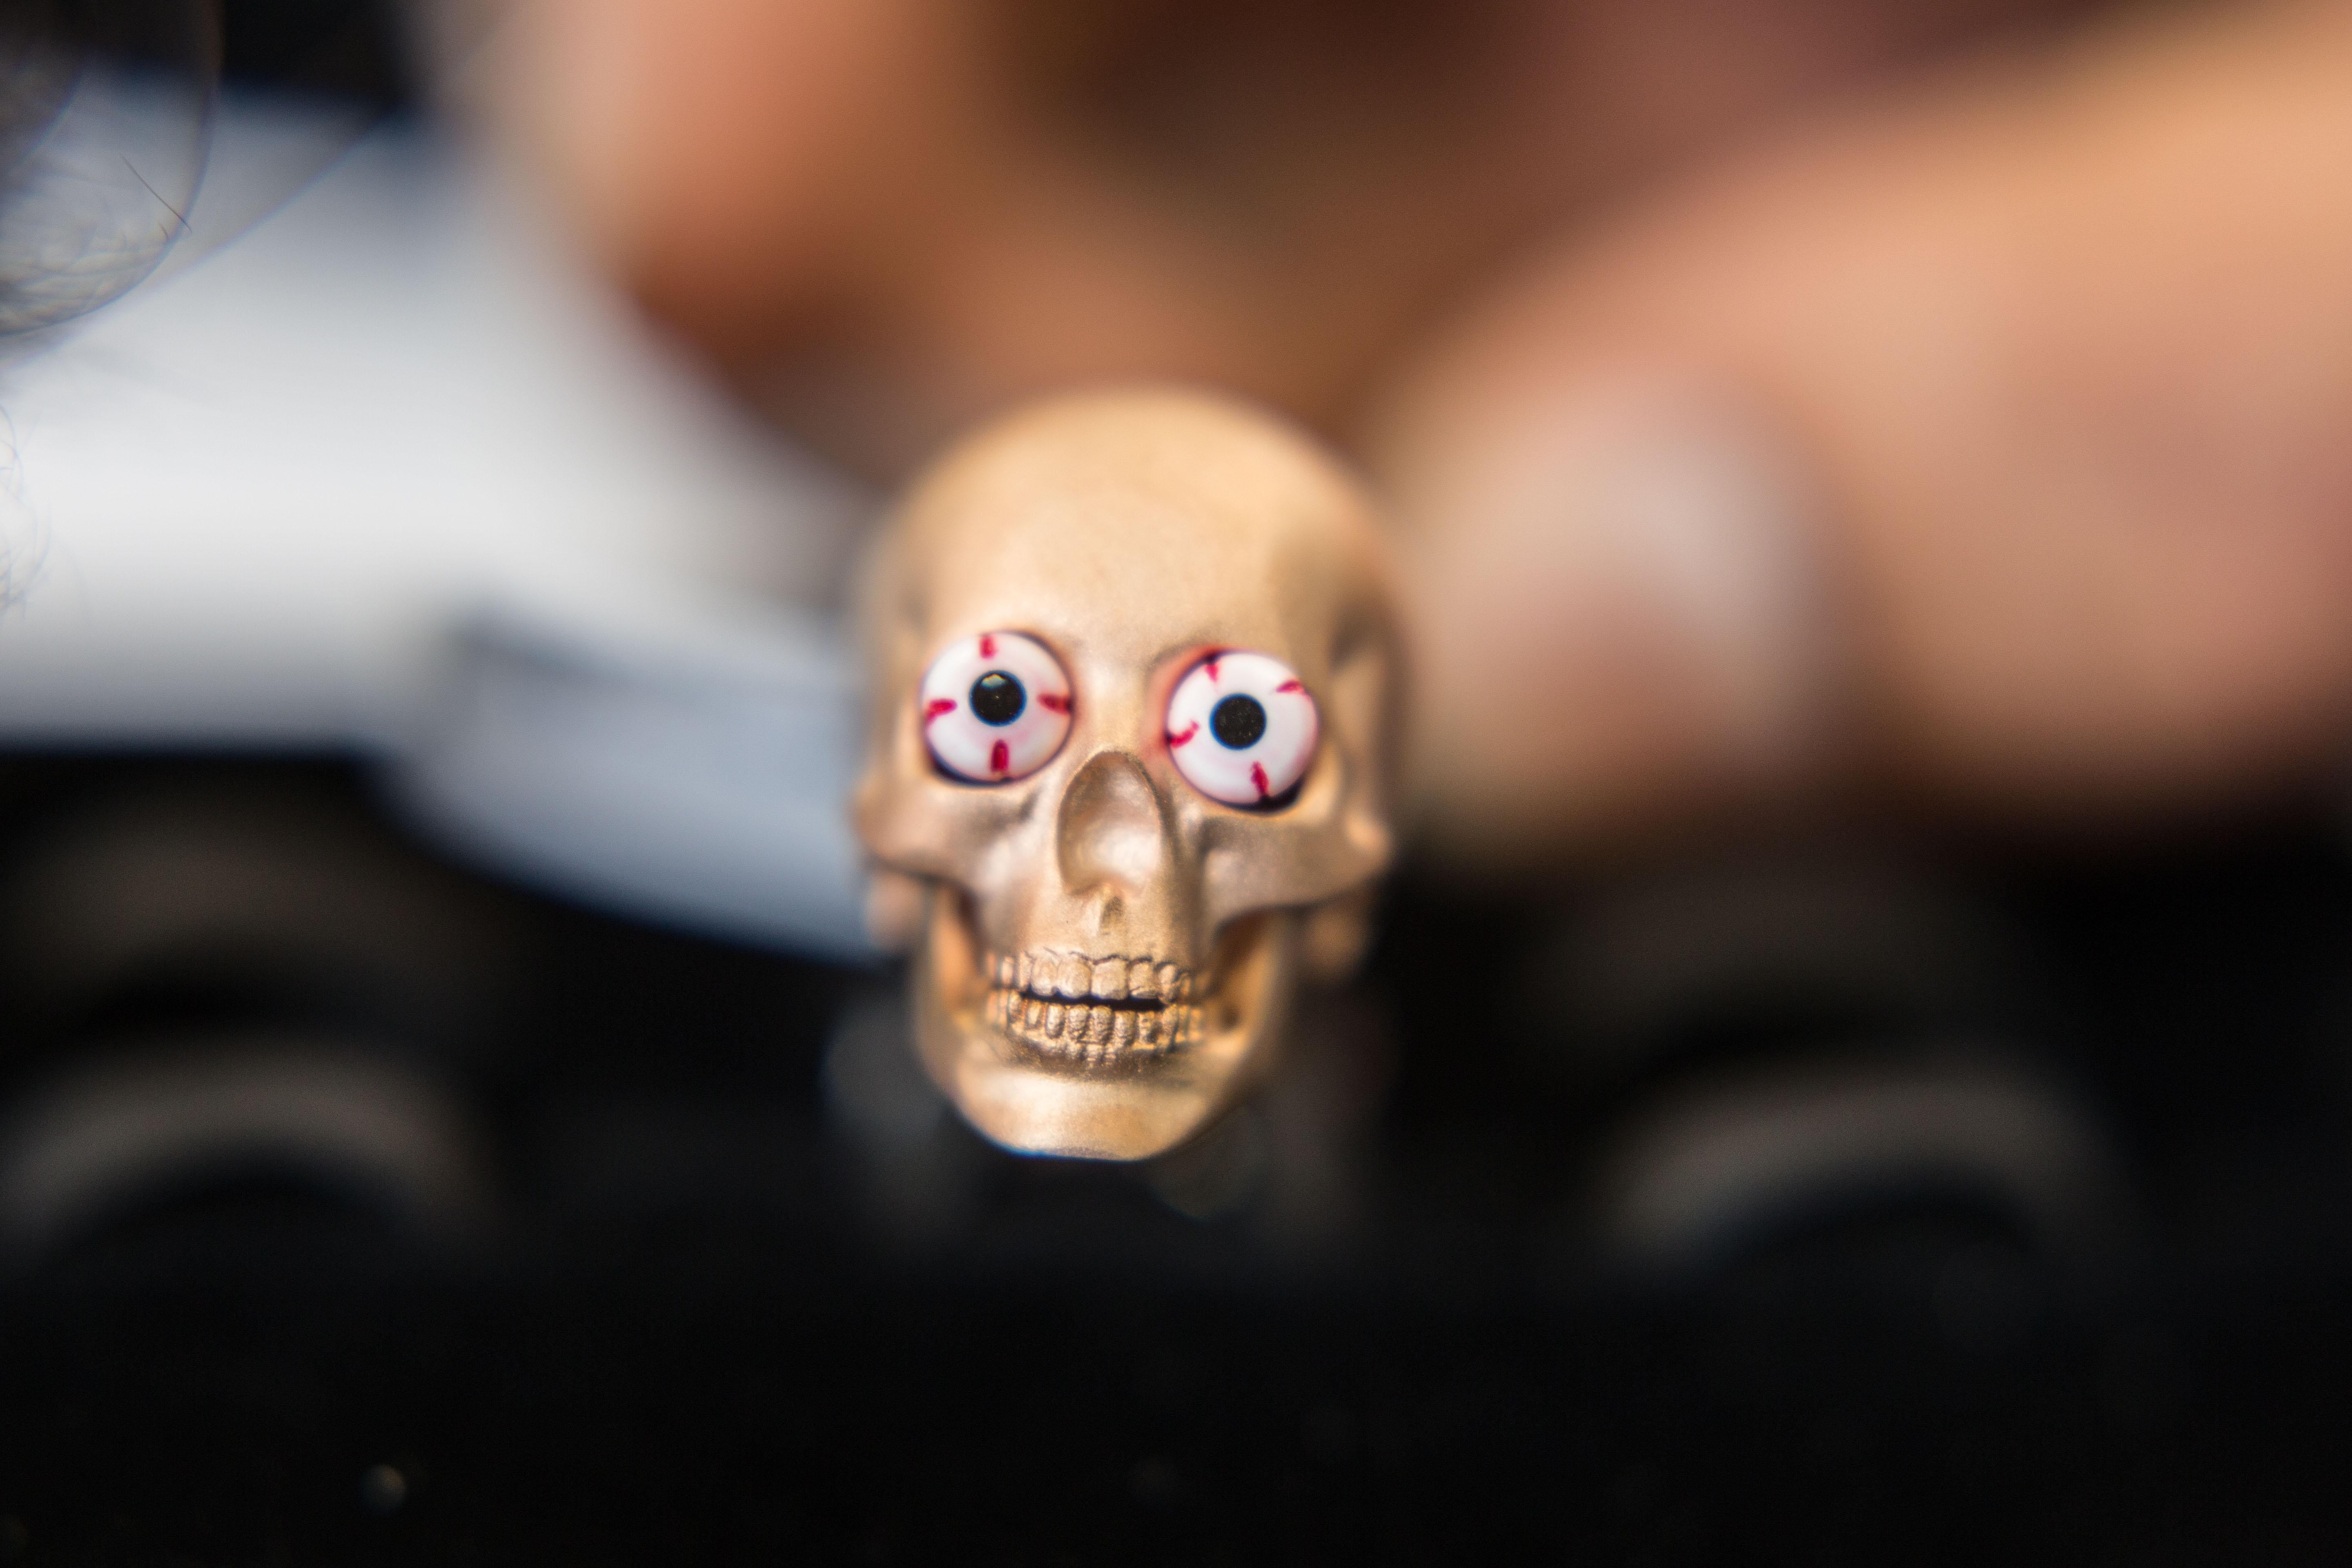 DEAKIN & FRANCIS, Piccadilly Arcade, London

Wonderfully fun and eye catching, these popping eye skulls are a great addition to the ever expanding Deakin & Francis skull offering. In a stylish rose gold satin finish, these skull cufflinks feature